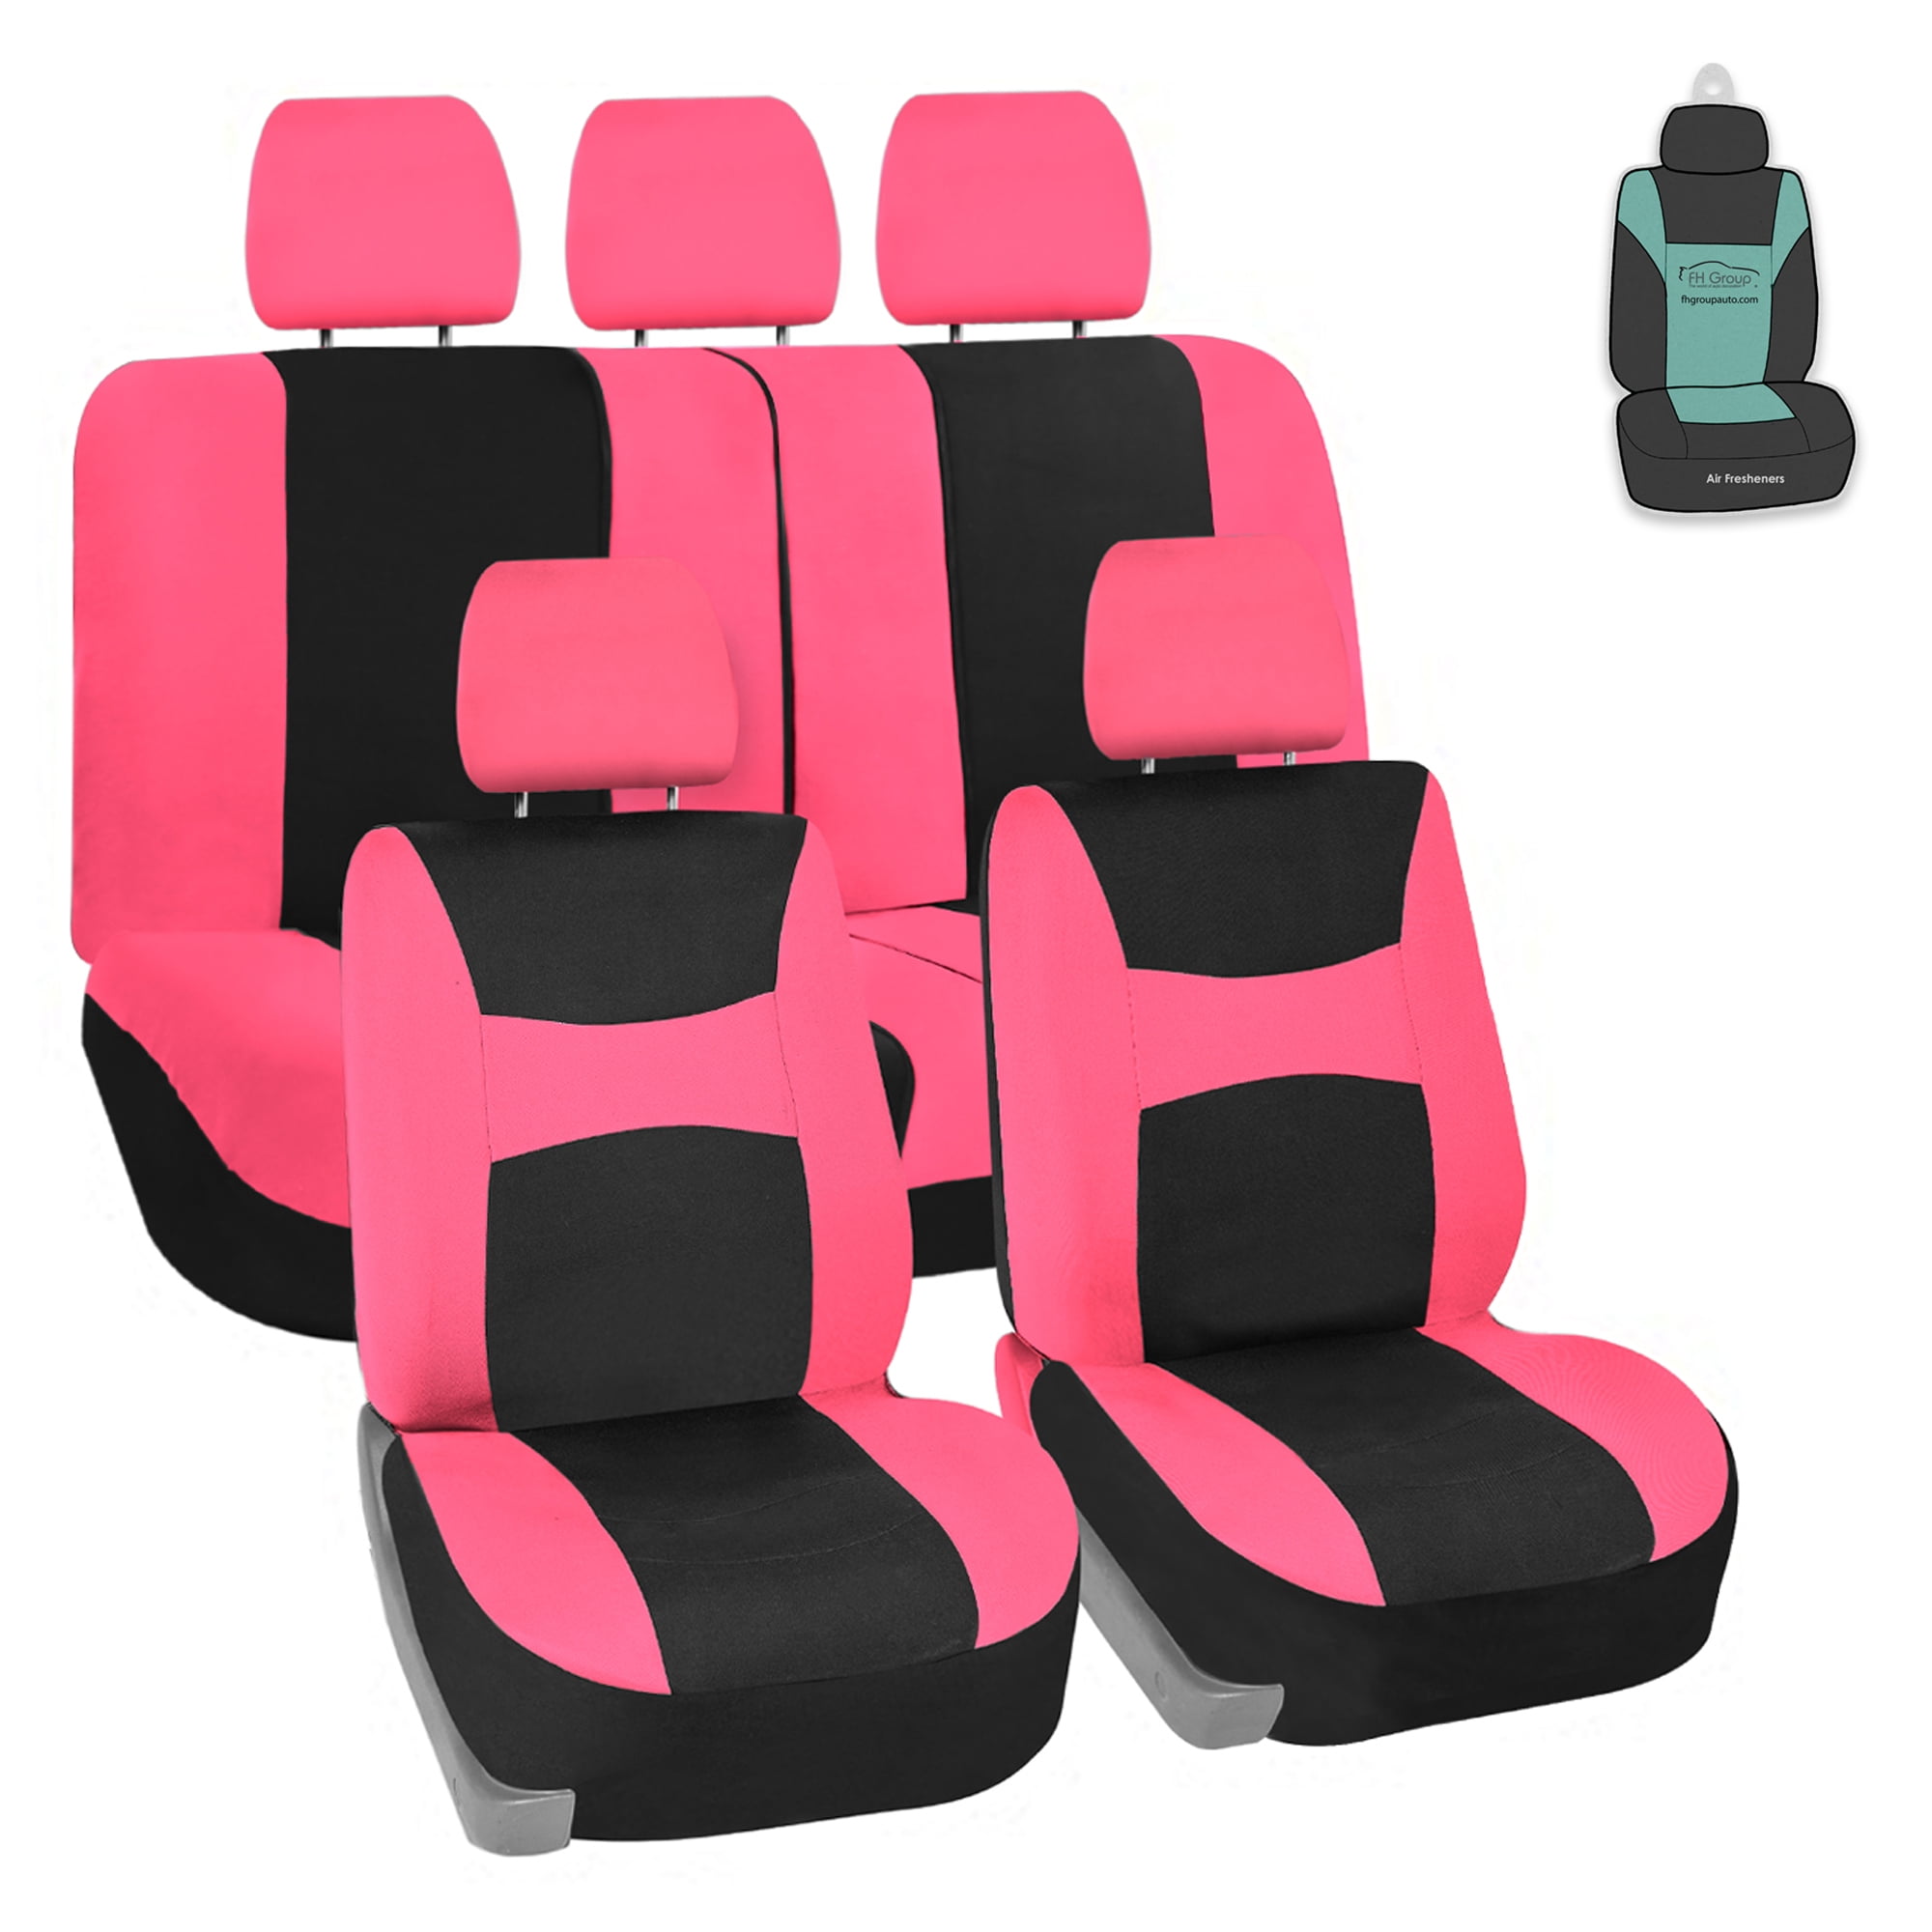 Fh Group Light And Breezy Flat Cloth Car Seat Cover Universal Pink Full Set Seat Covers With Air